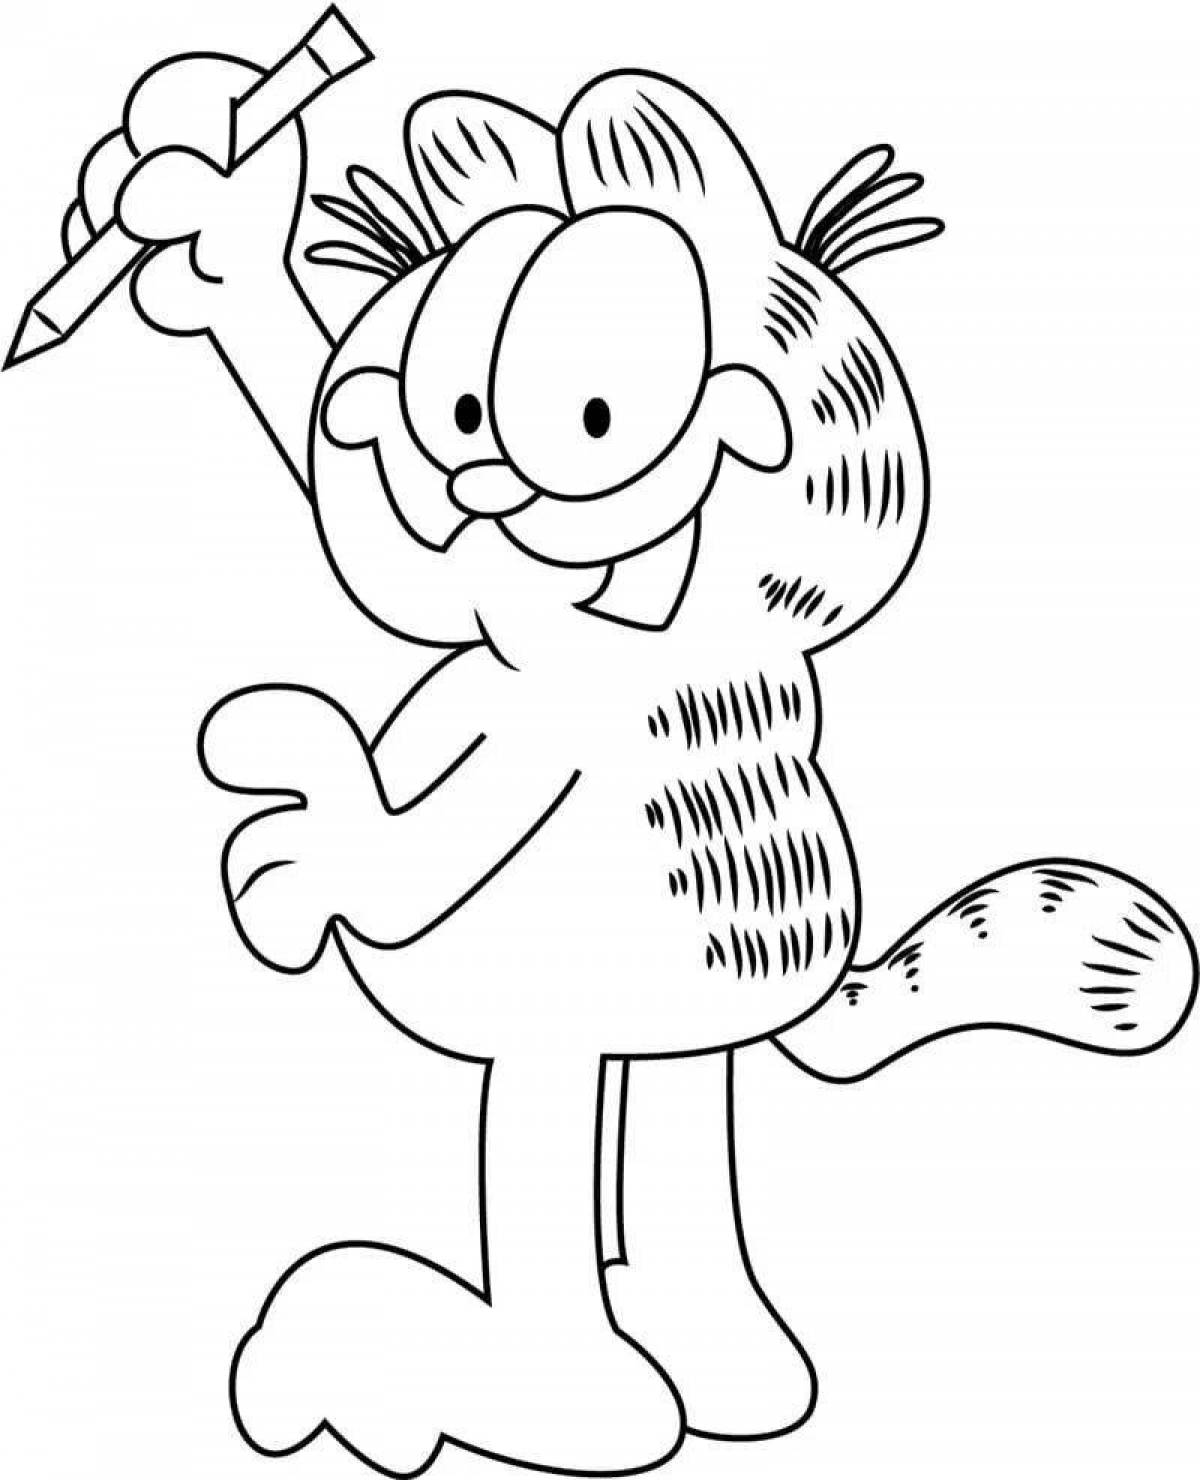 Adorable Garfield Cat Coloring Page